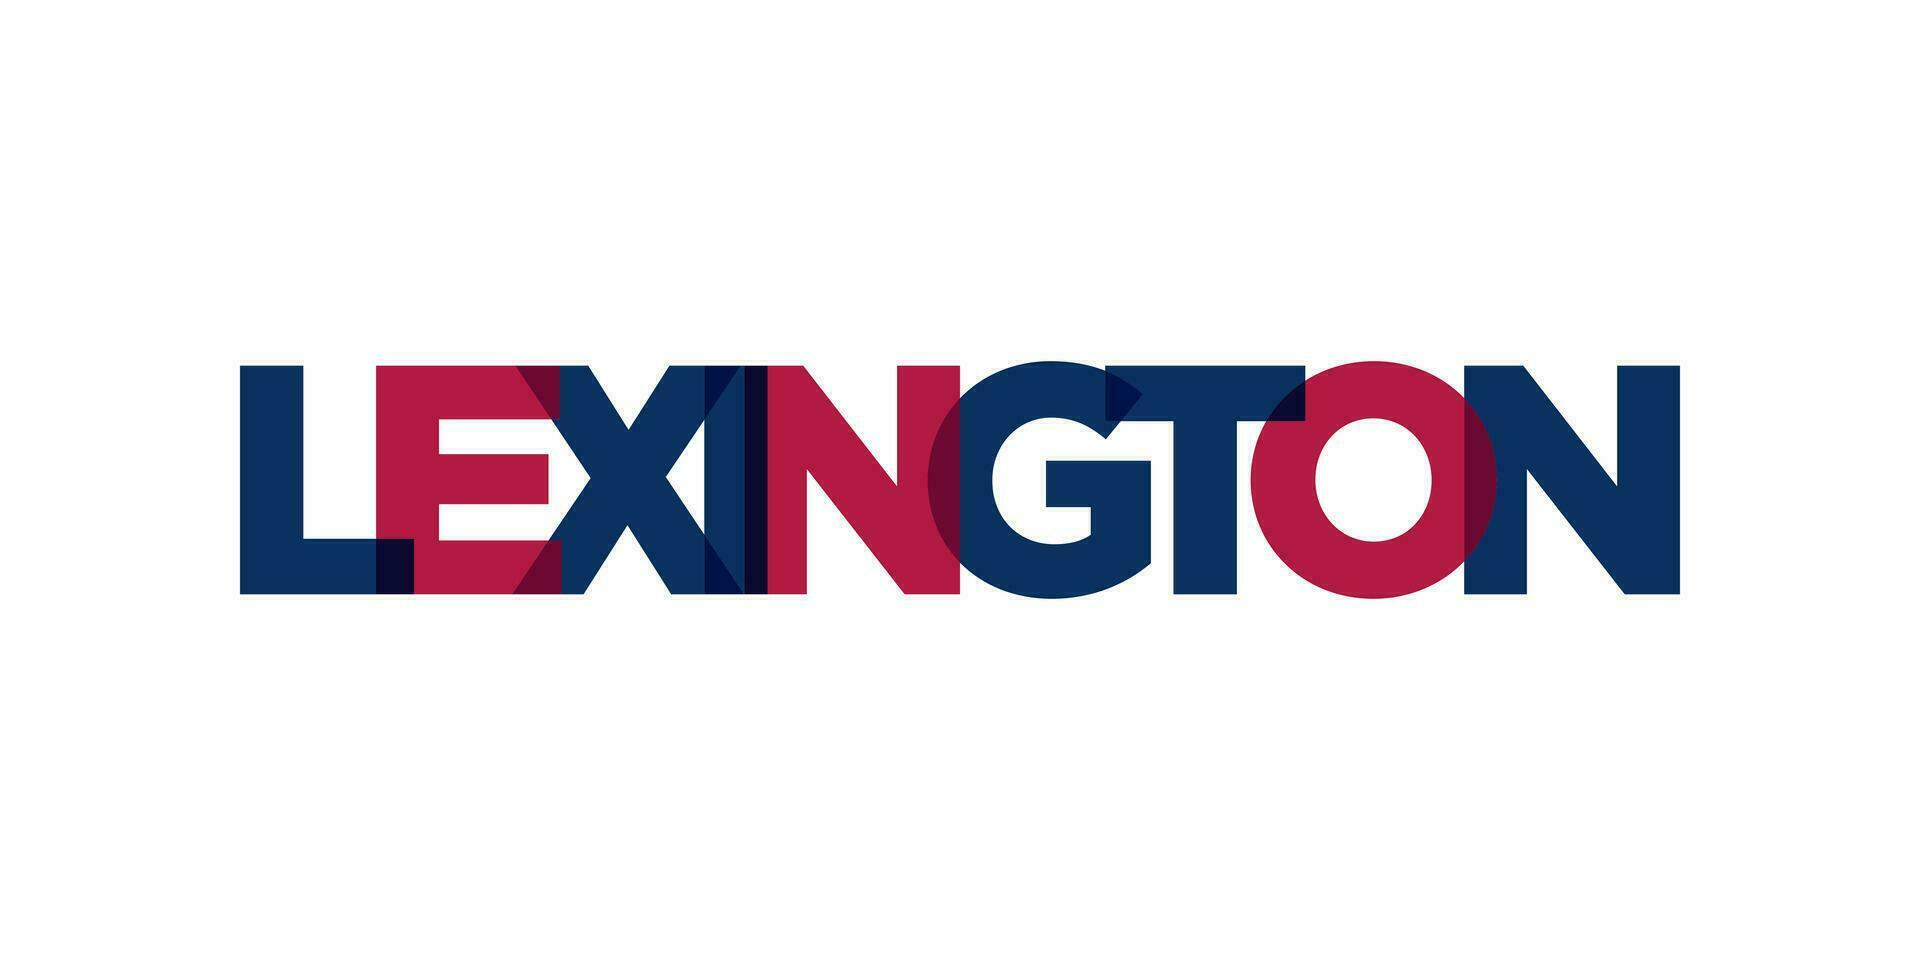 Lexington-Fayette, Kentucky, USA typography slogan design. America logo with graphic city lettering for print and web. vector